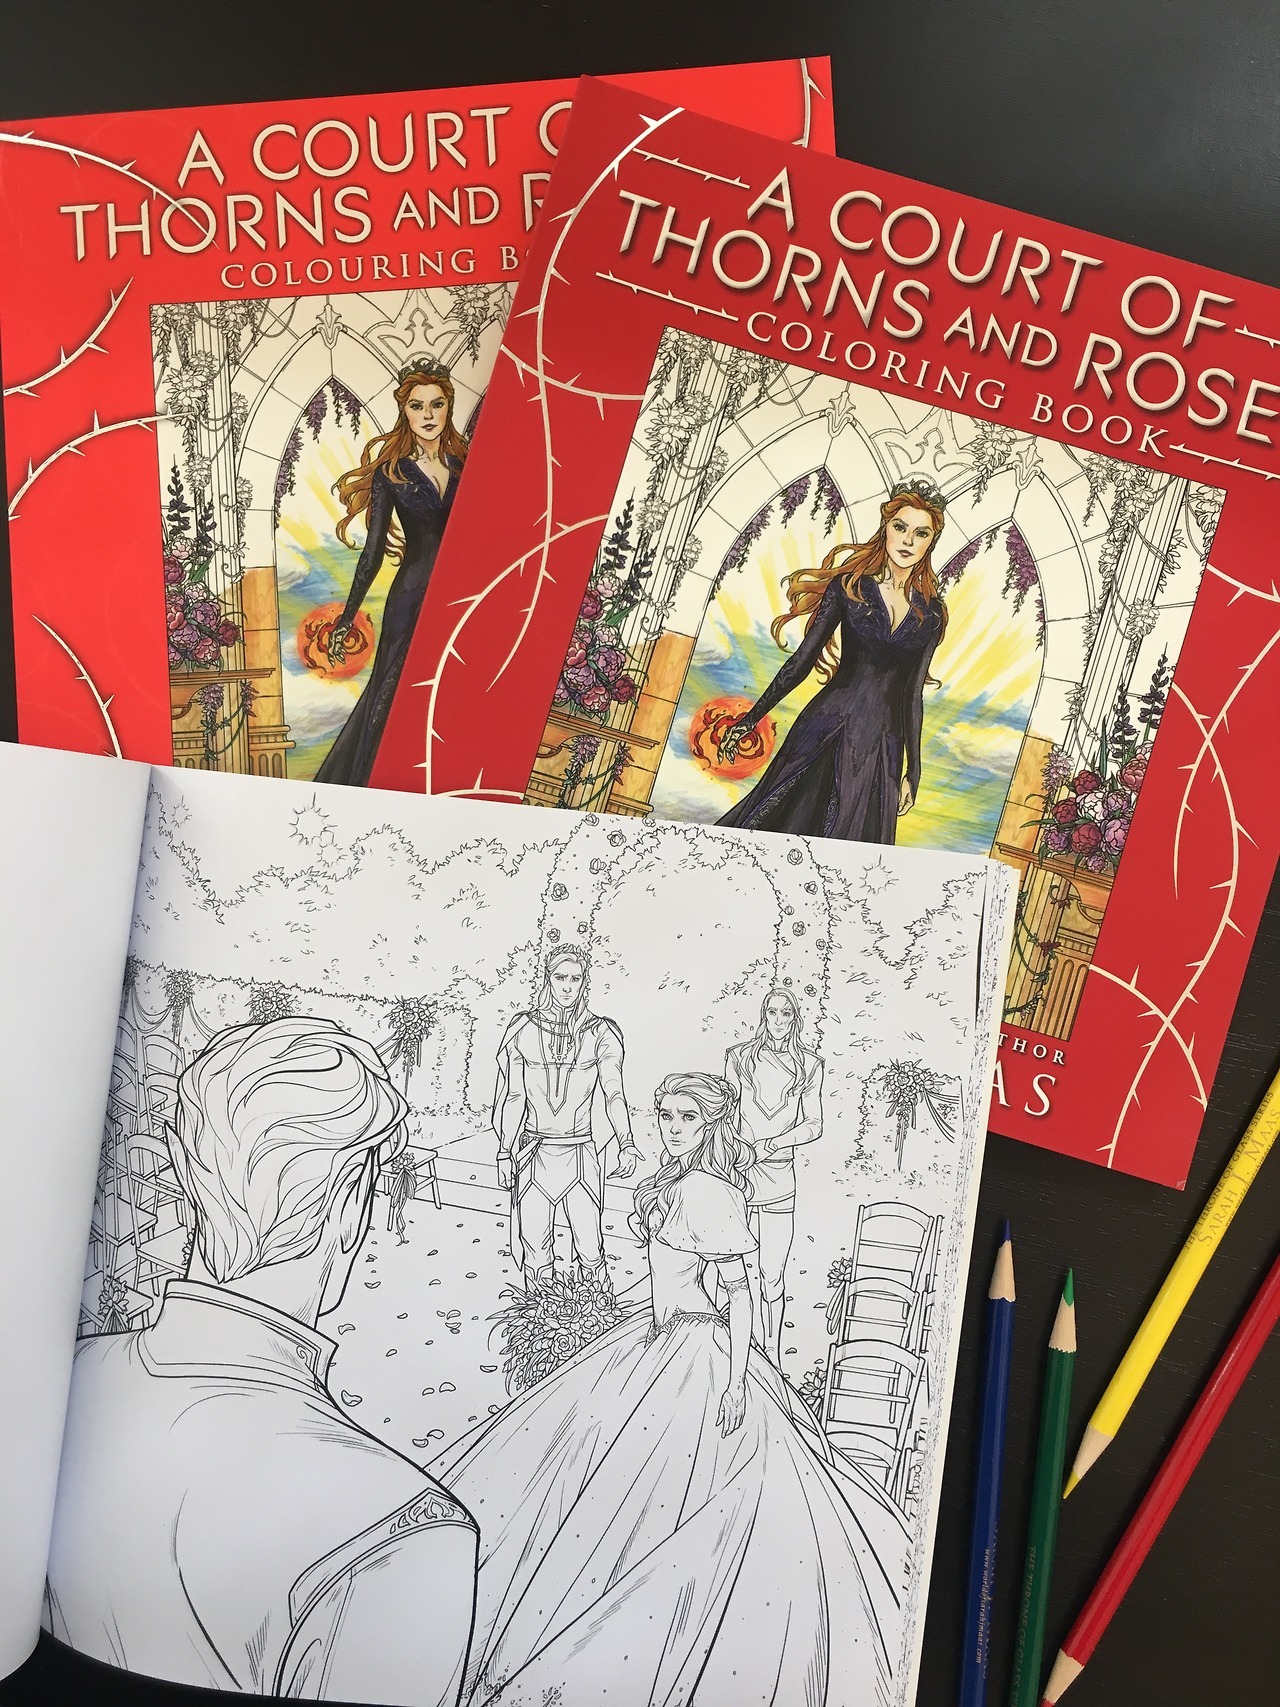 THE WORLD OF SARAH J. MAAS — Here's your first look inside the ACOTAR  coloring